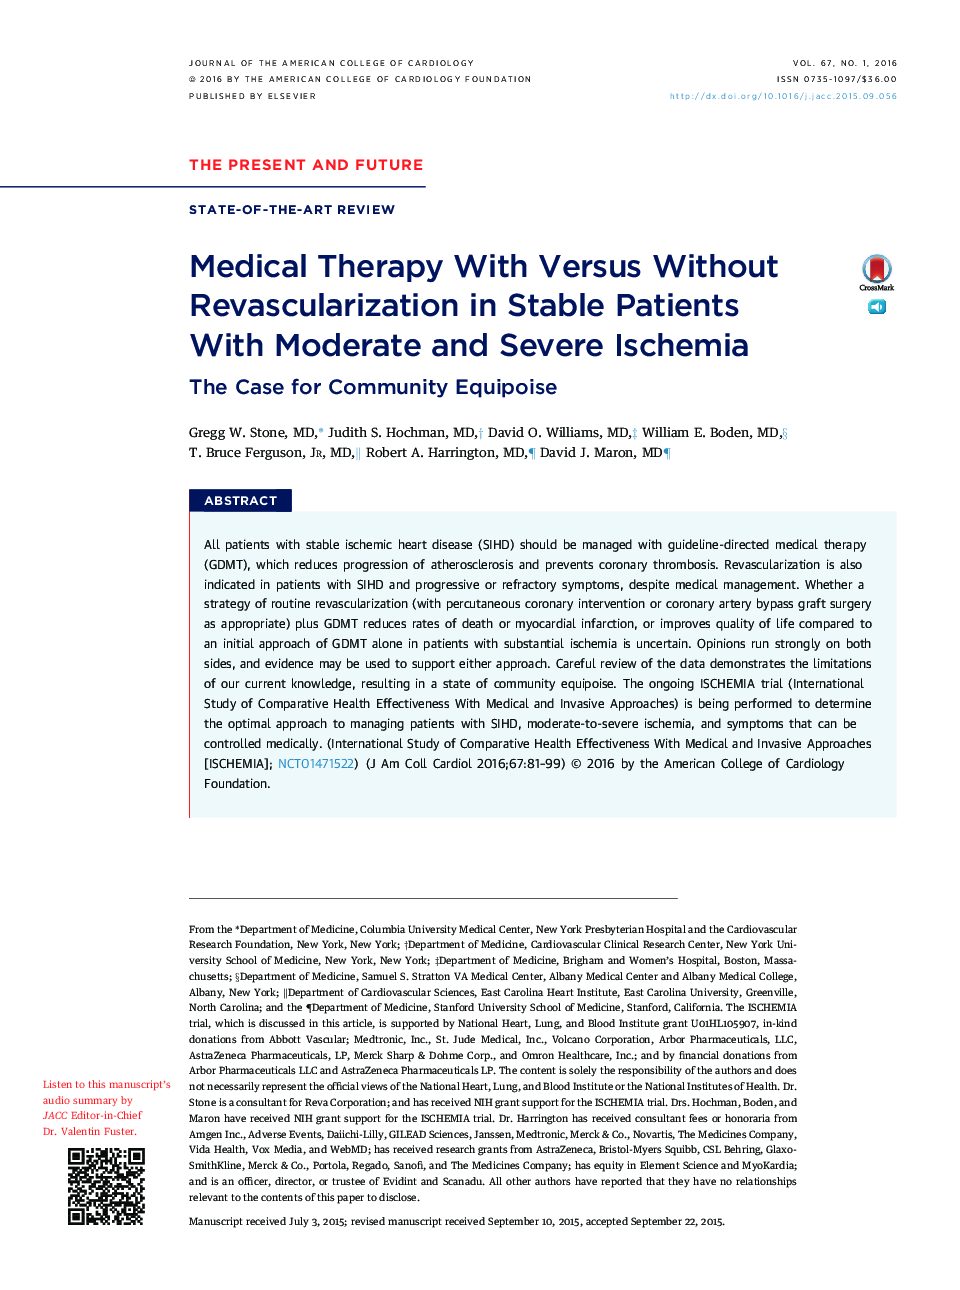 Medical Therapy With Versus Without Revascularization in Stable Patients WithÂ Moderate and Severe Ischemia: The Case for Community Equipoise